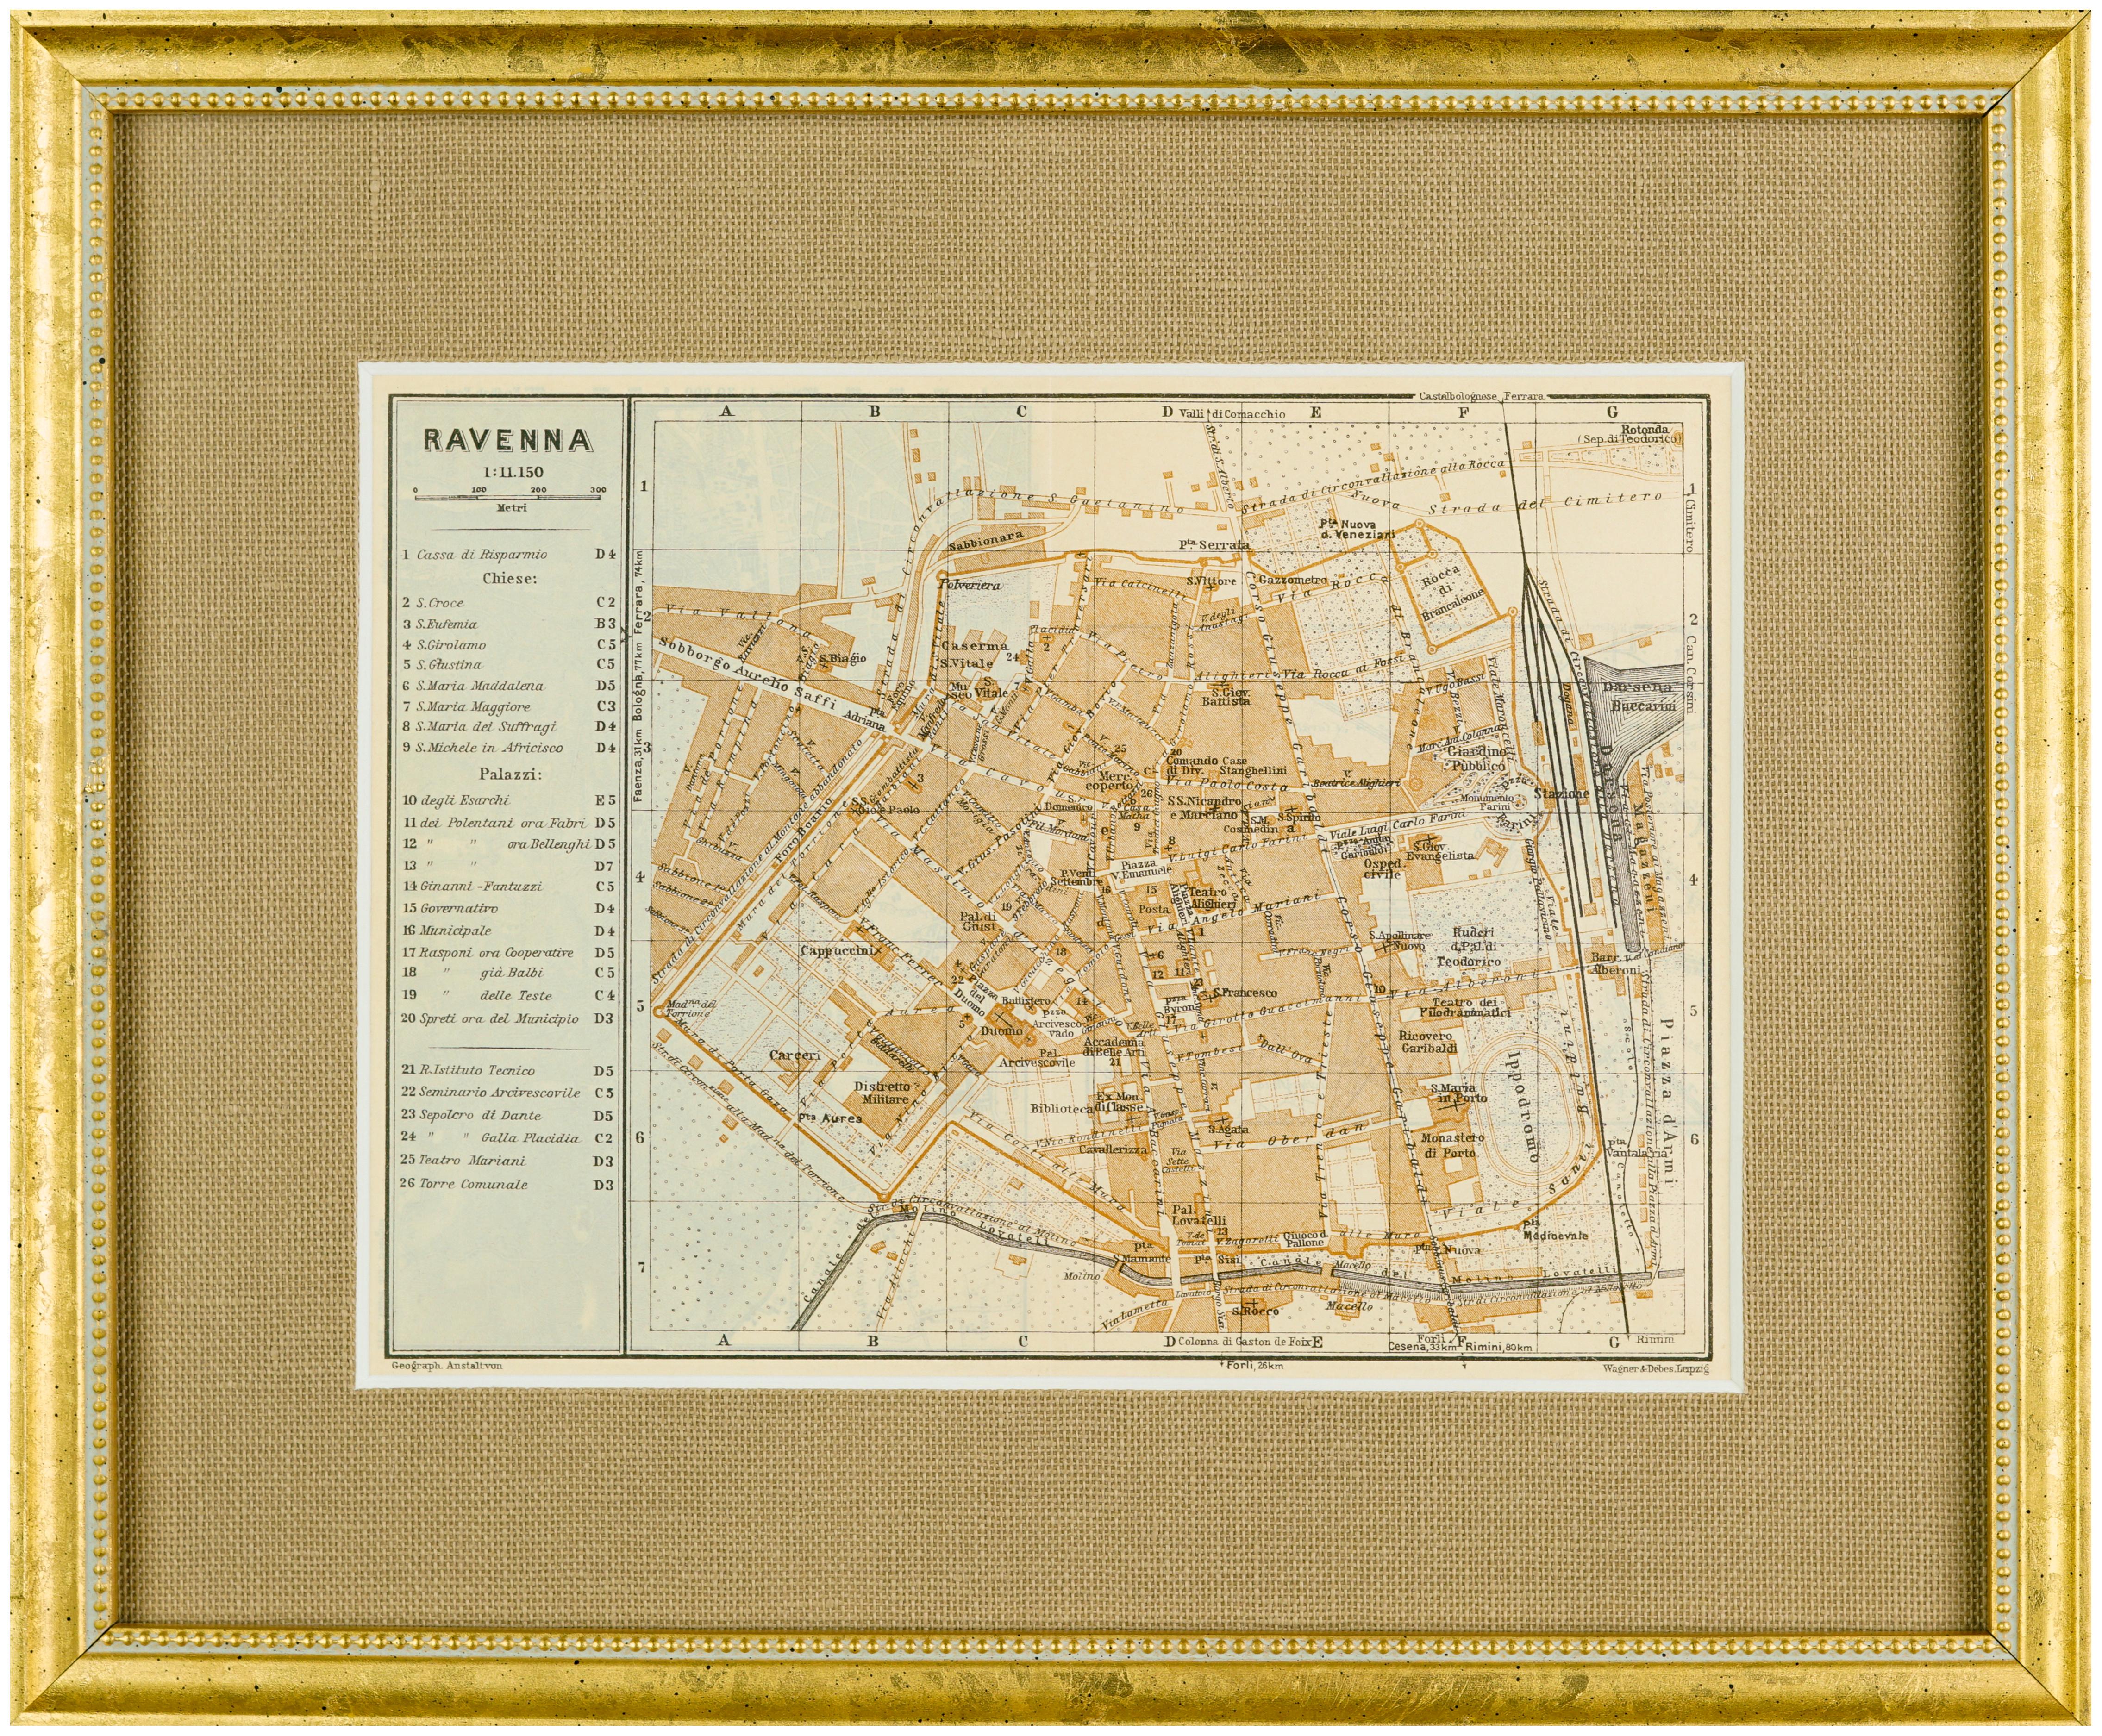 Unknown Landscape Print - 1928 Map of Ravenna, Italy